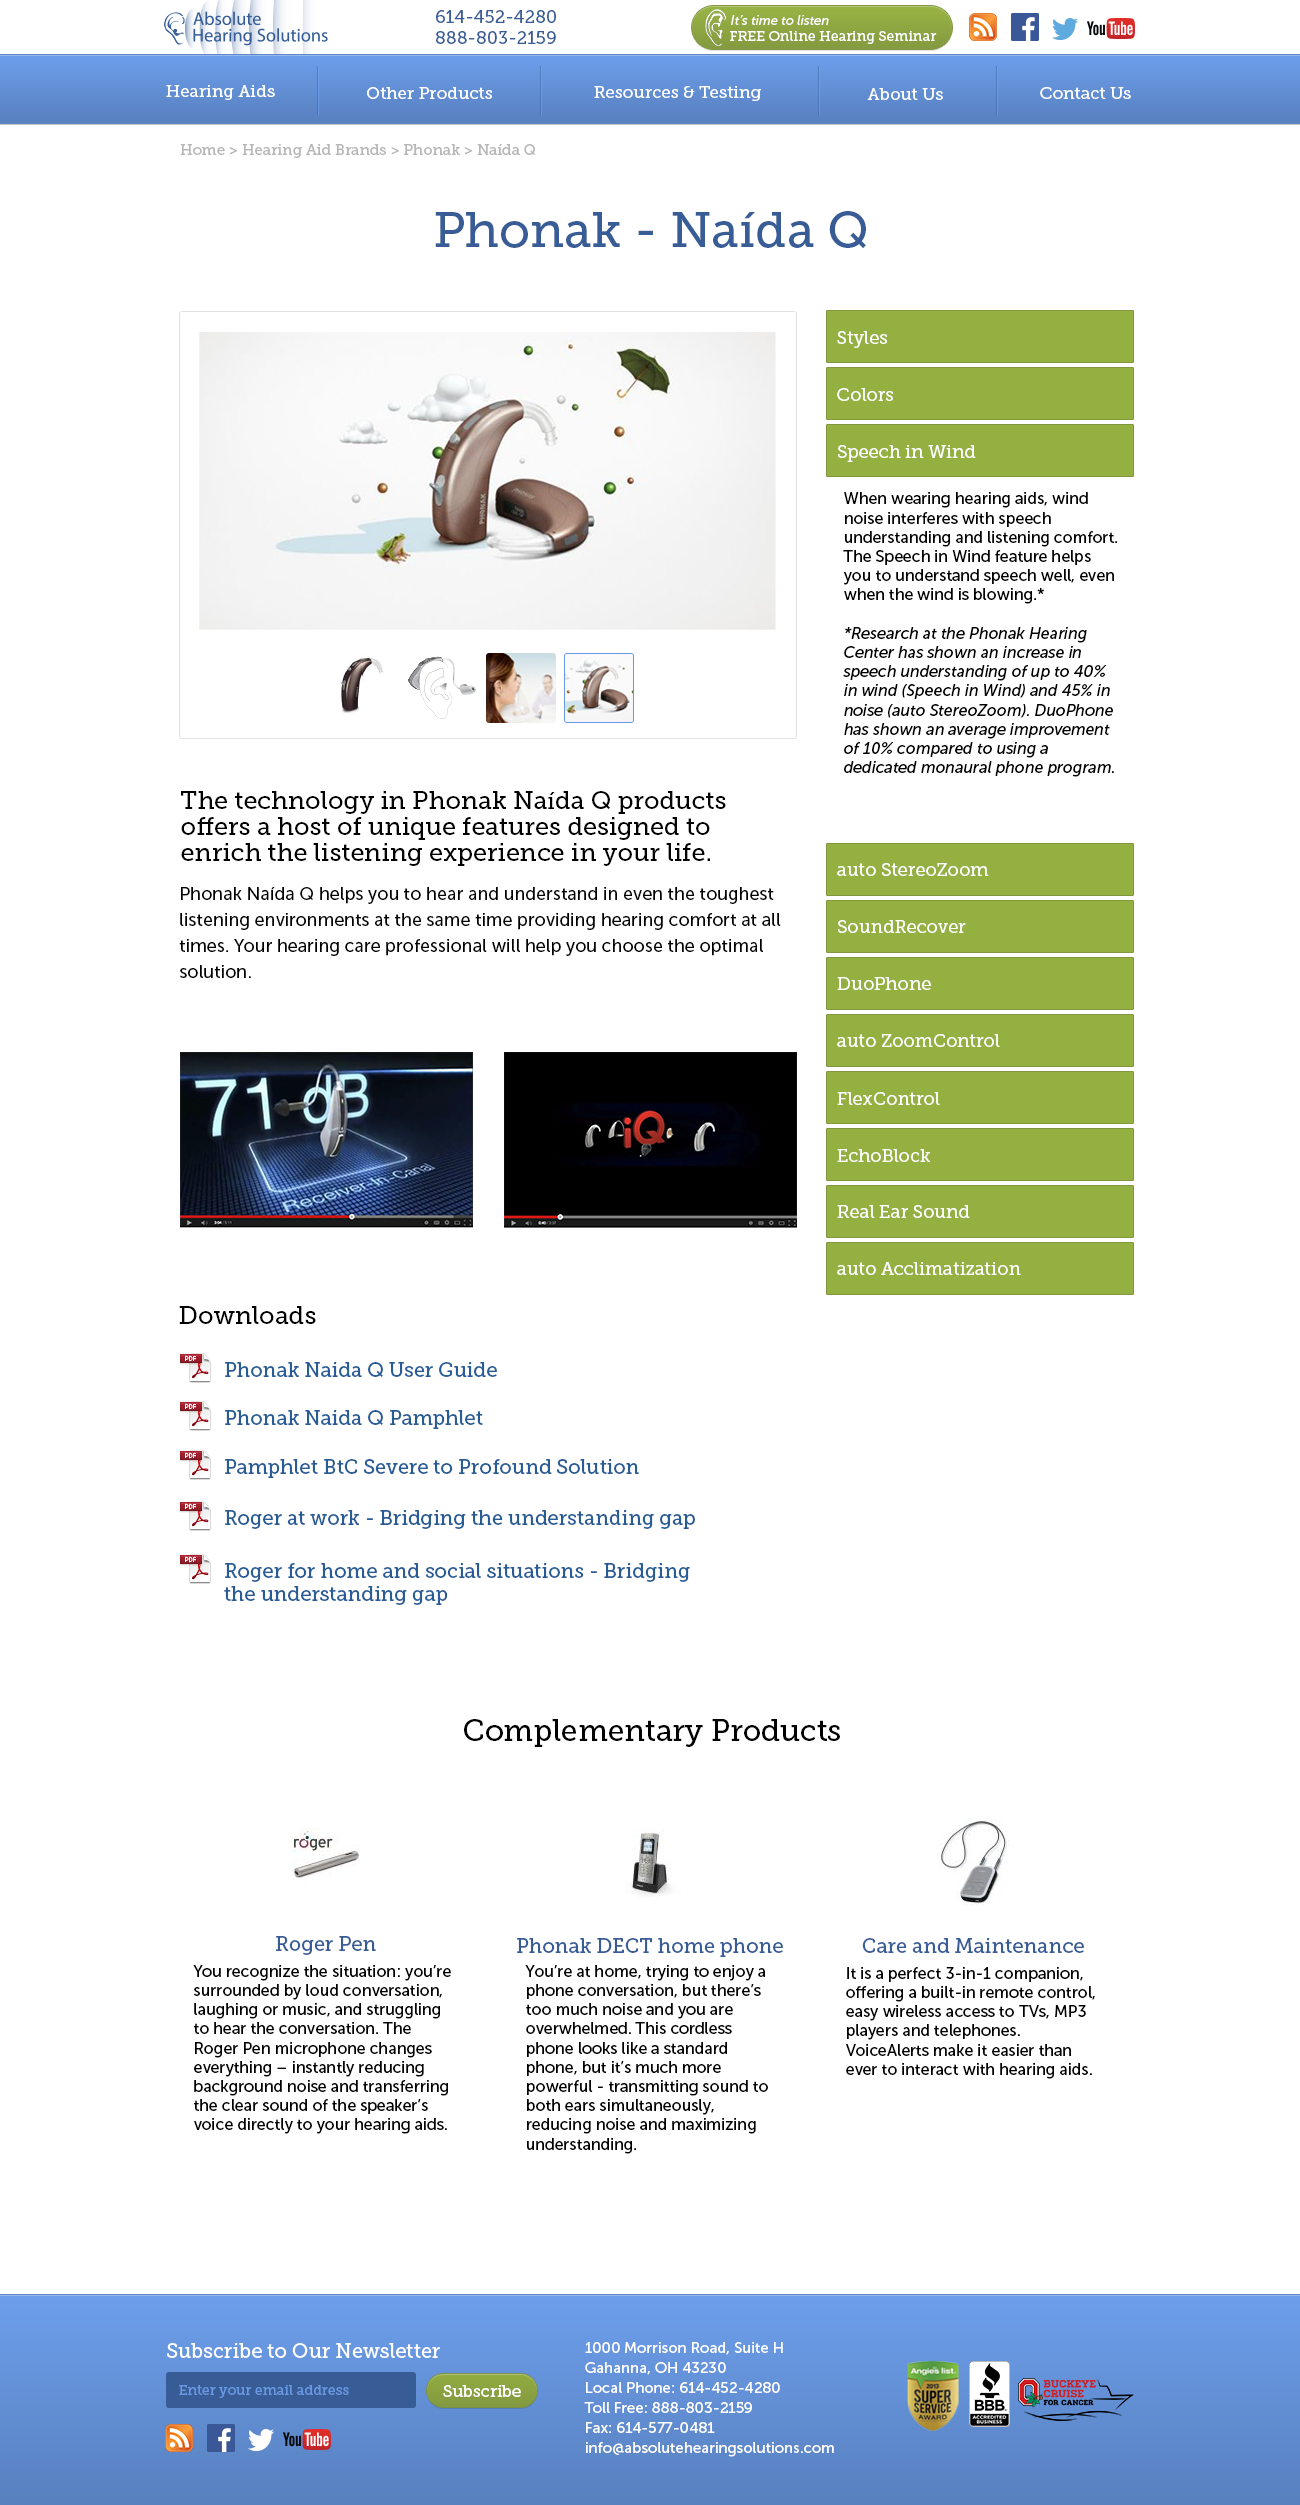 Absolute Hearing Solutions website redesign specific model comp